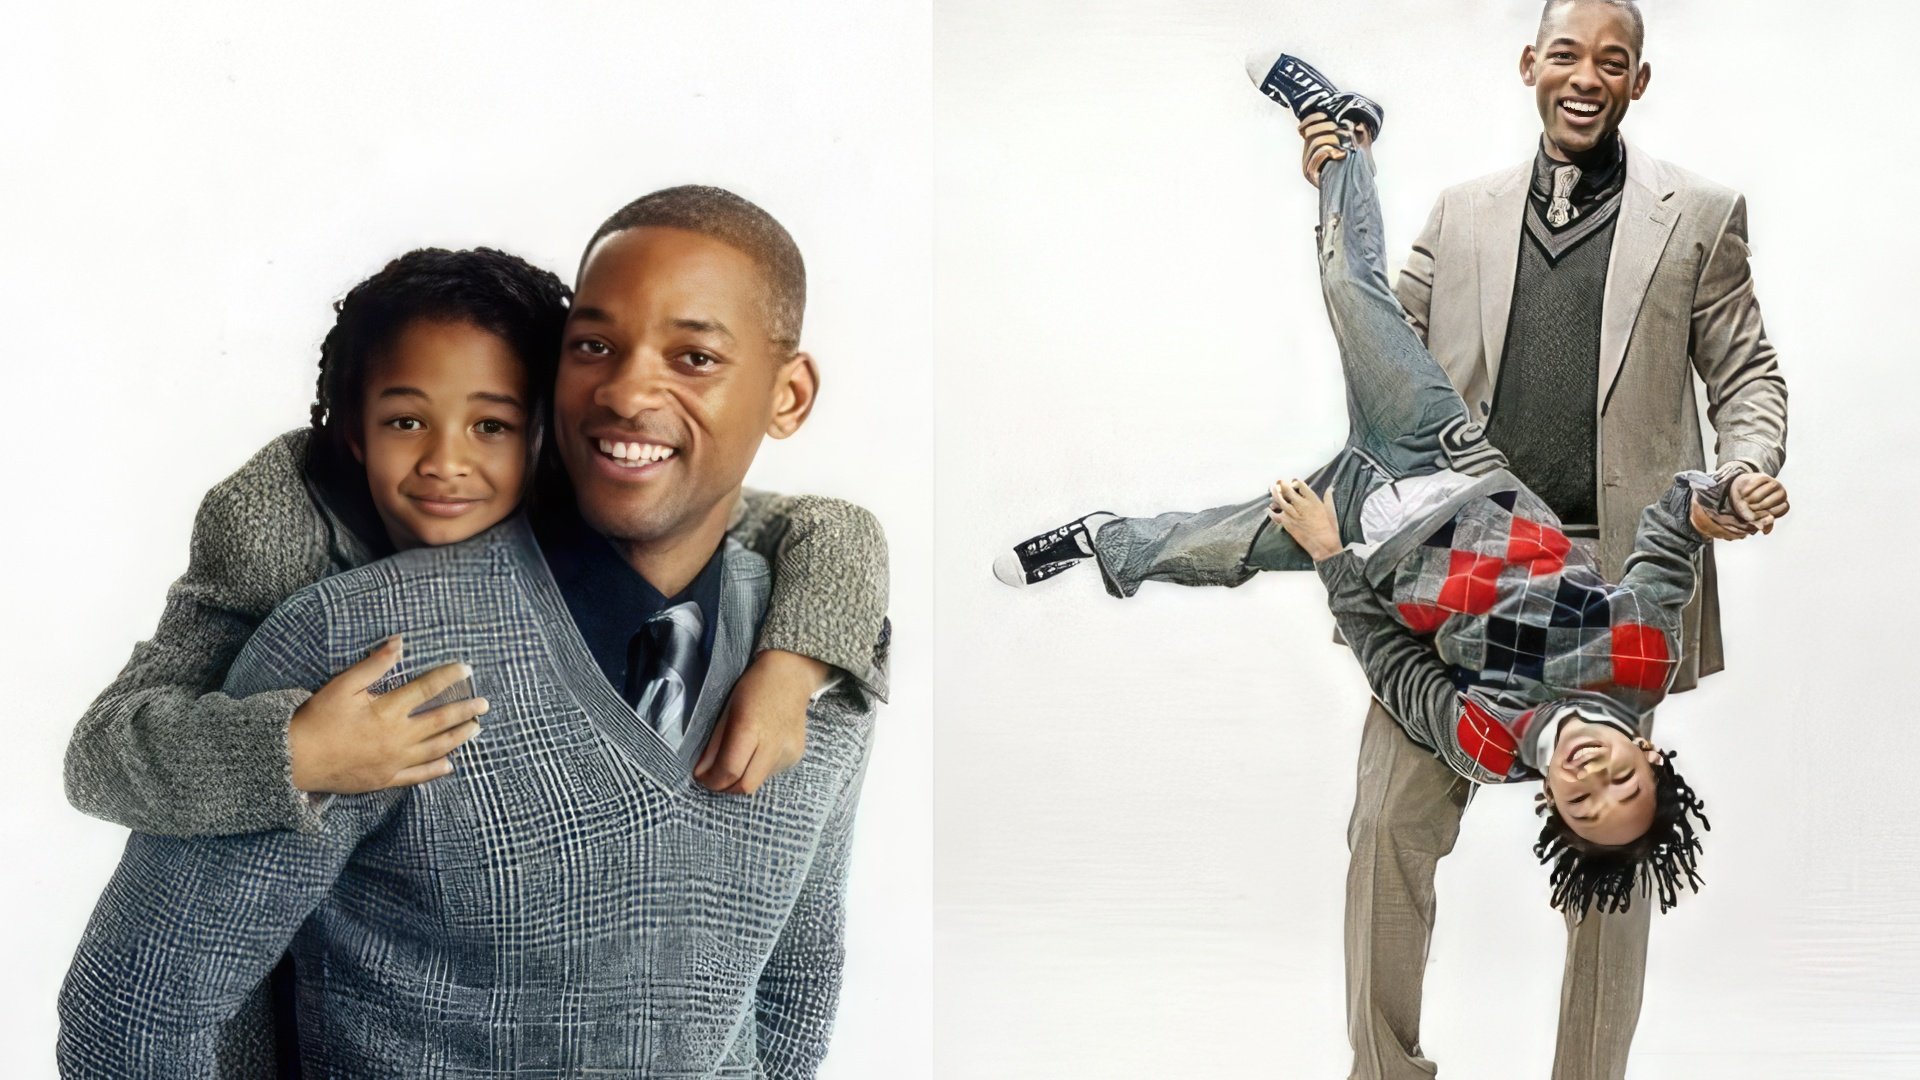 Jaden Smith as a child with his father Will Smith